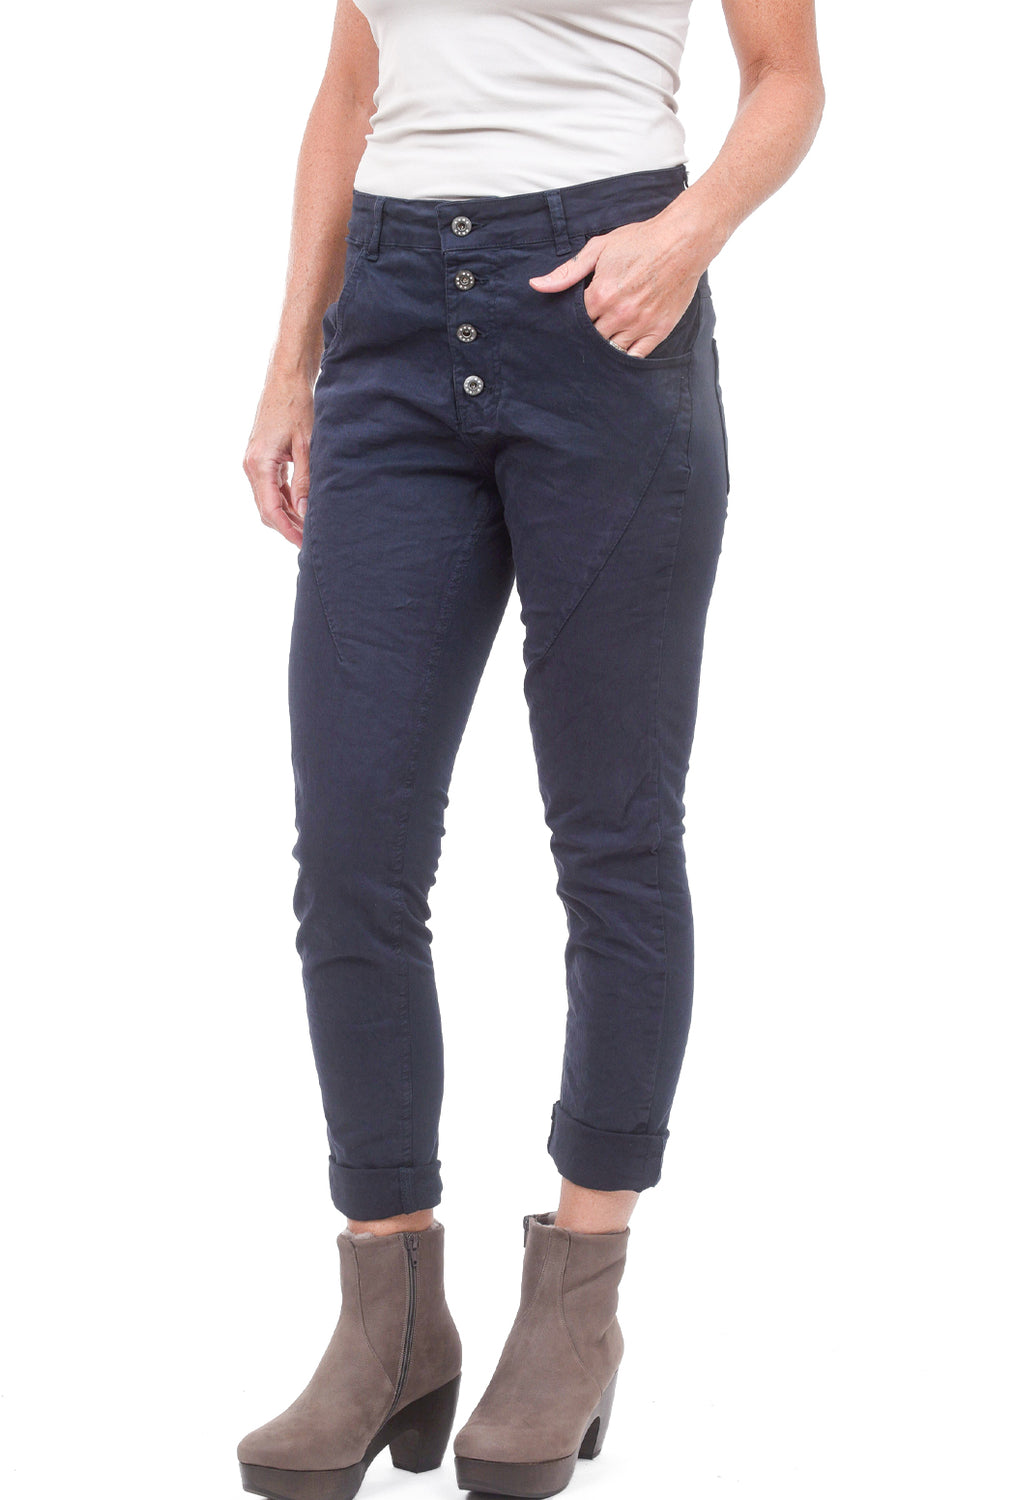 Signature Button Fly Pants, Navy